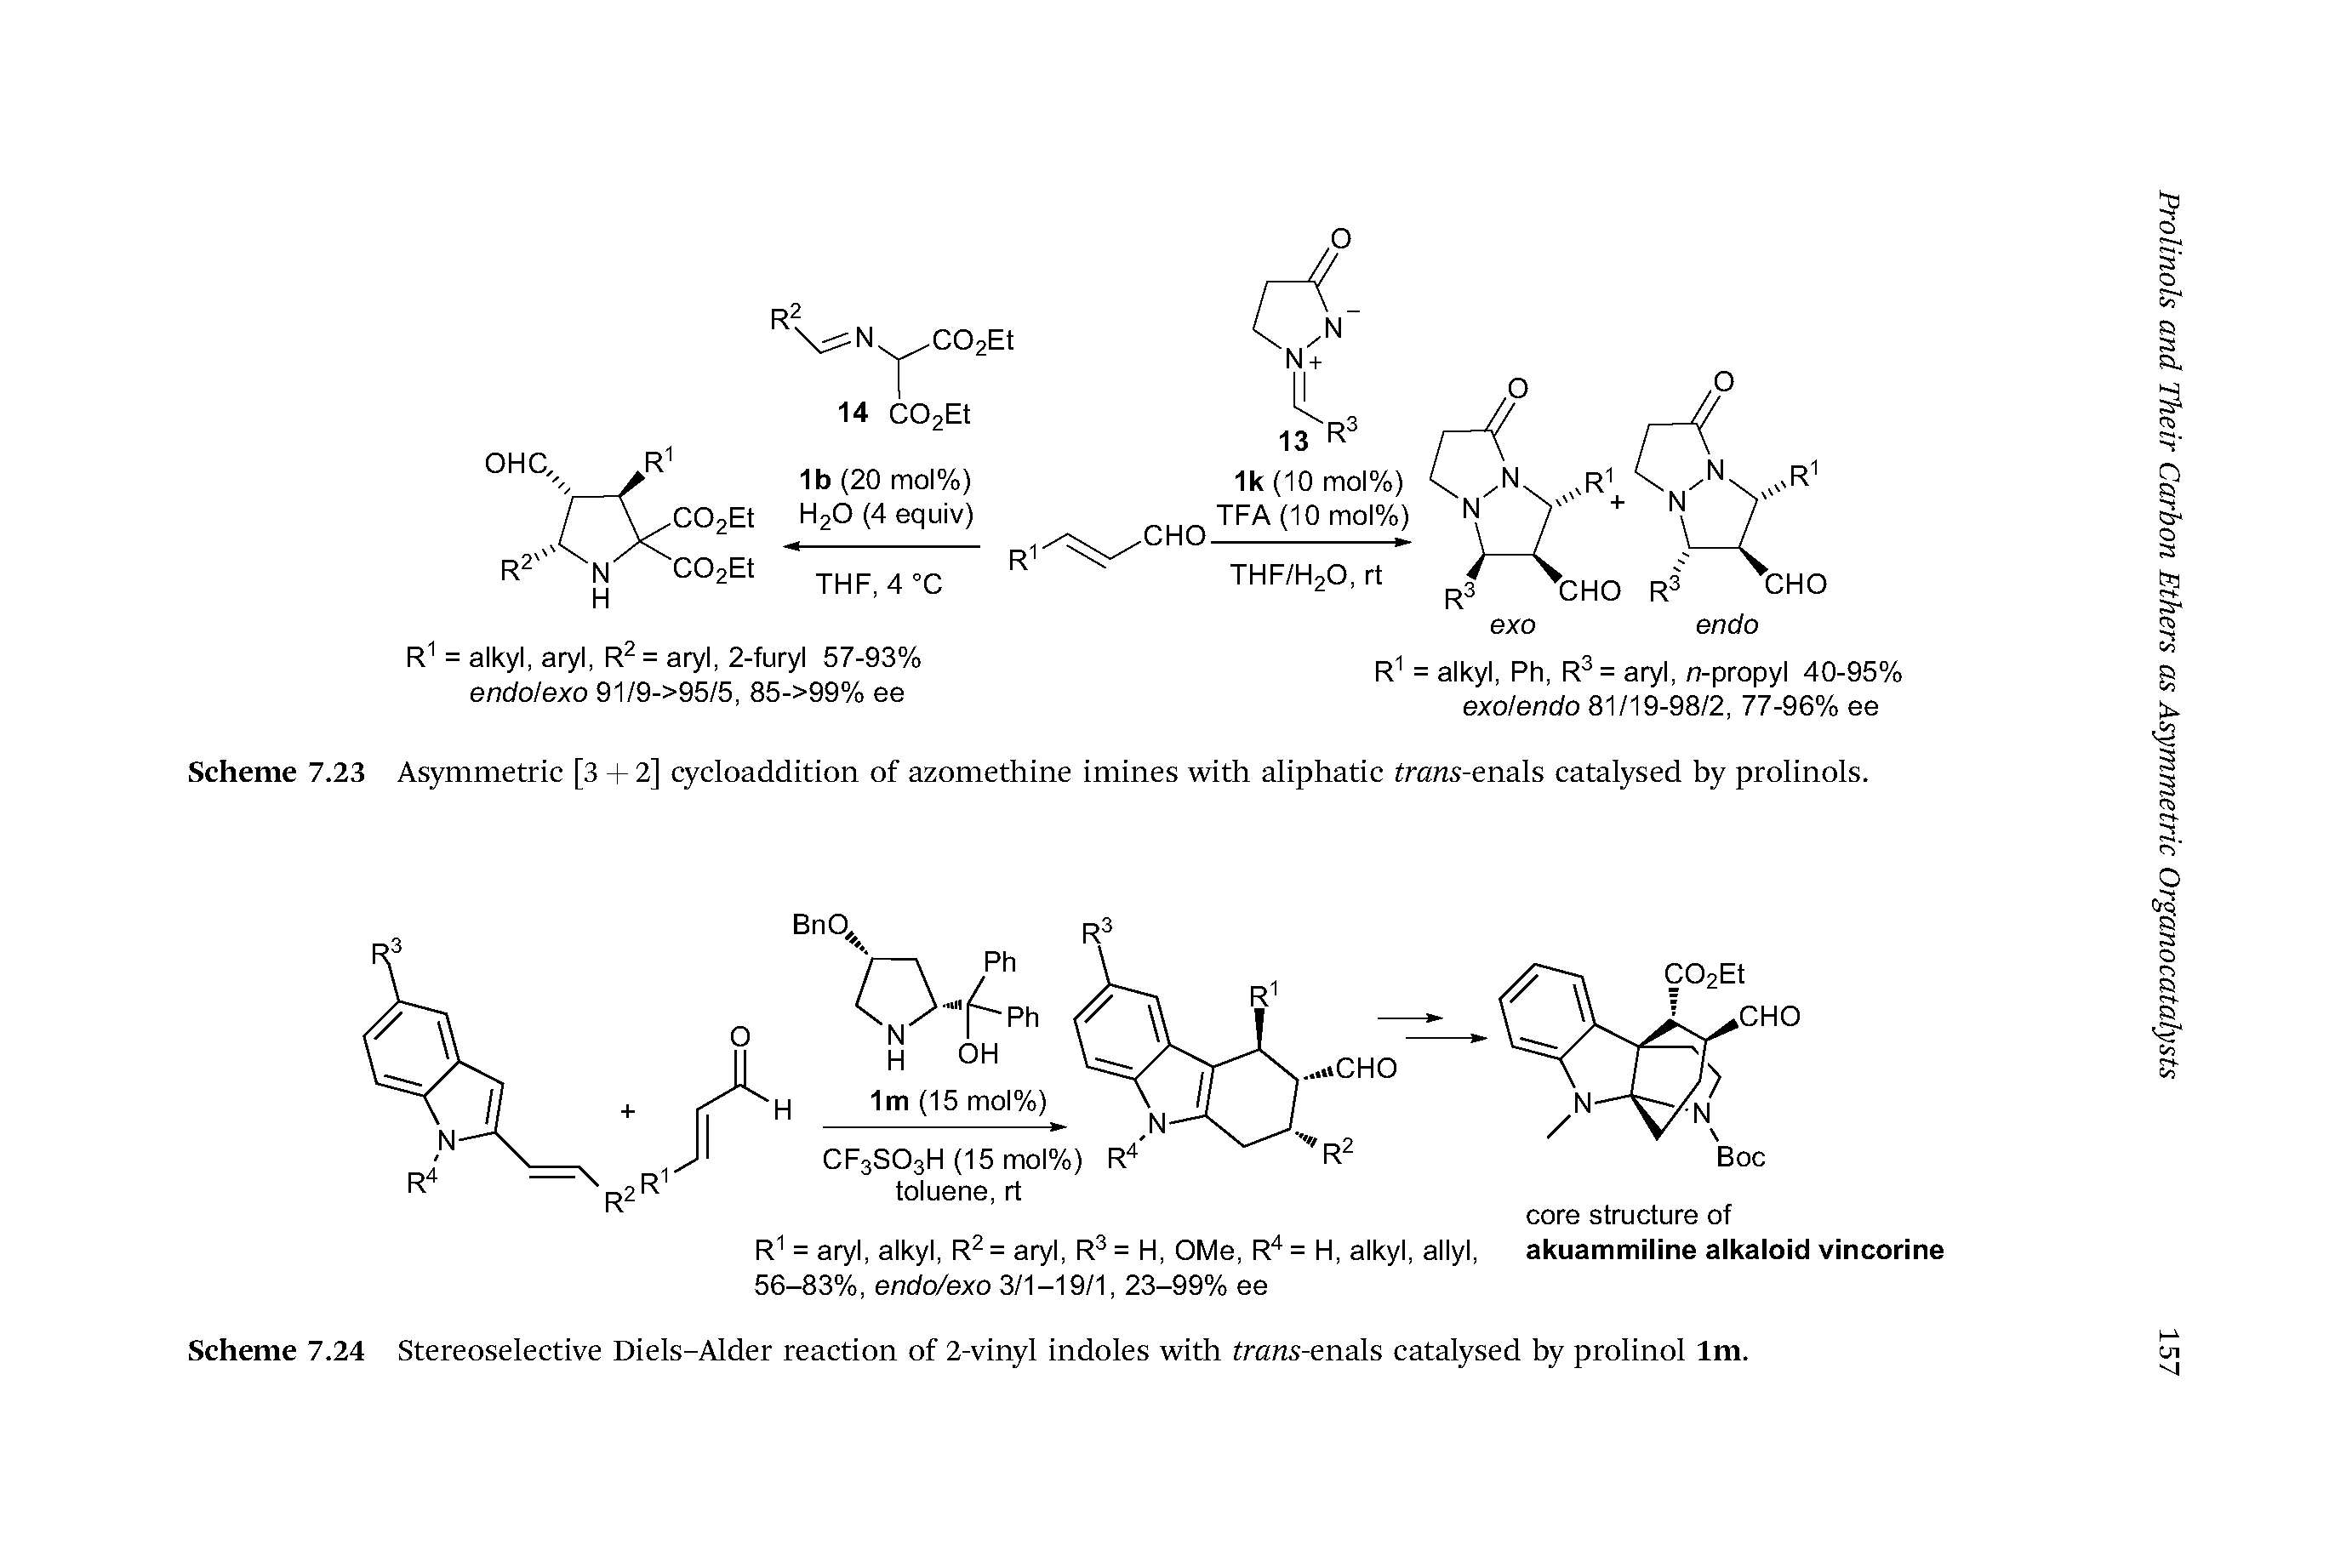 Scheme 7.24 Stereoselective Diels-Alder reaction of 2-vinyl indoles with trans-enals catalysed by prolinol Im.